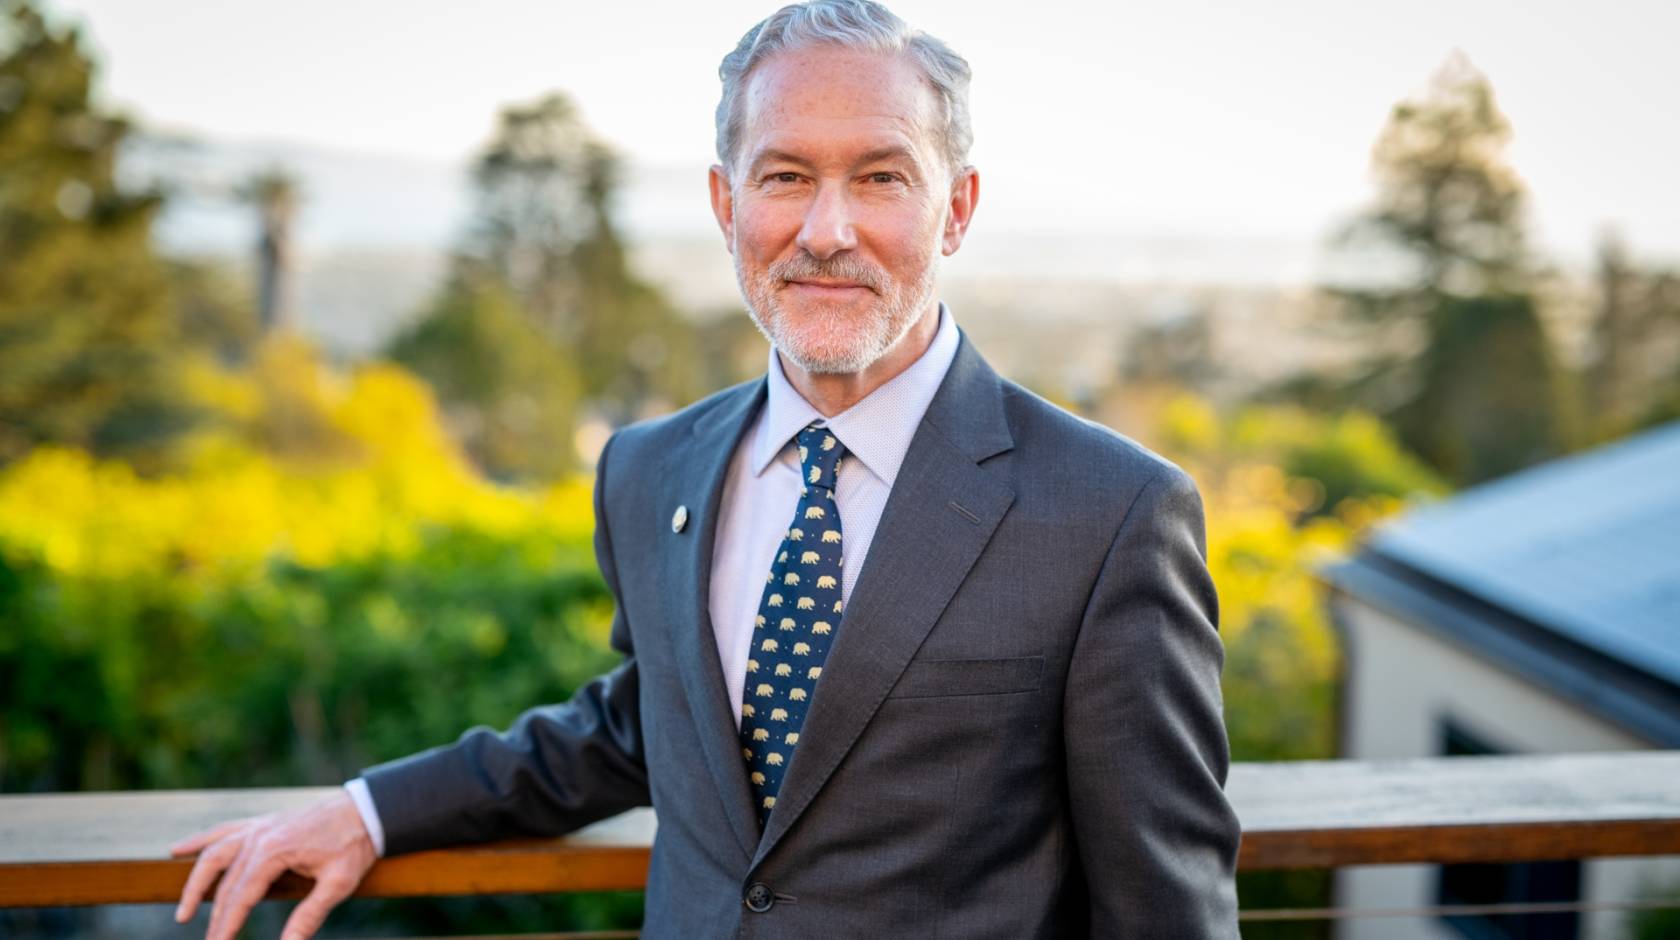 Rich Lyons, a white man with white hair and a white beard, smiling in a suit with a Berkeley bears tie, on campus